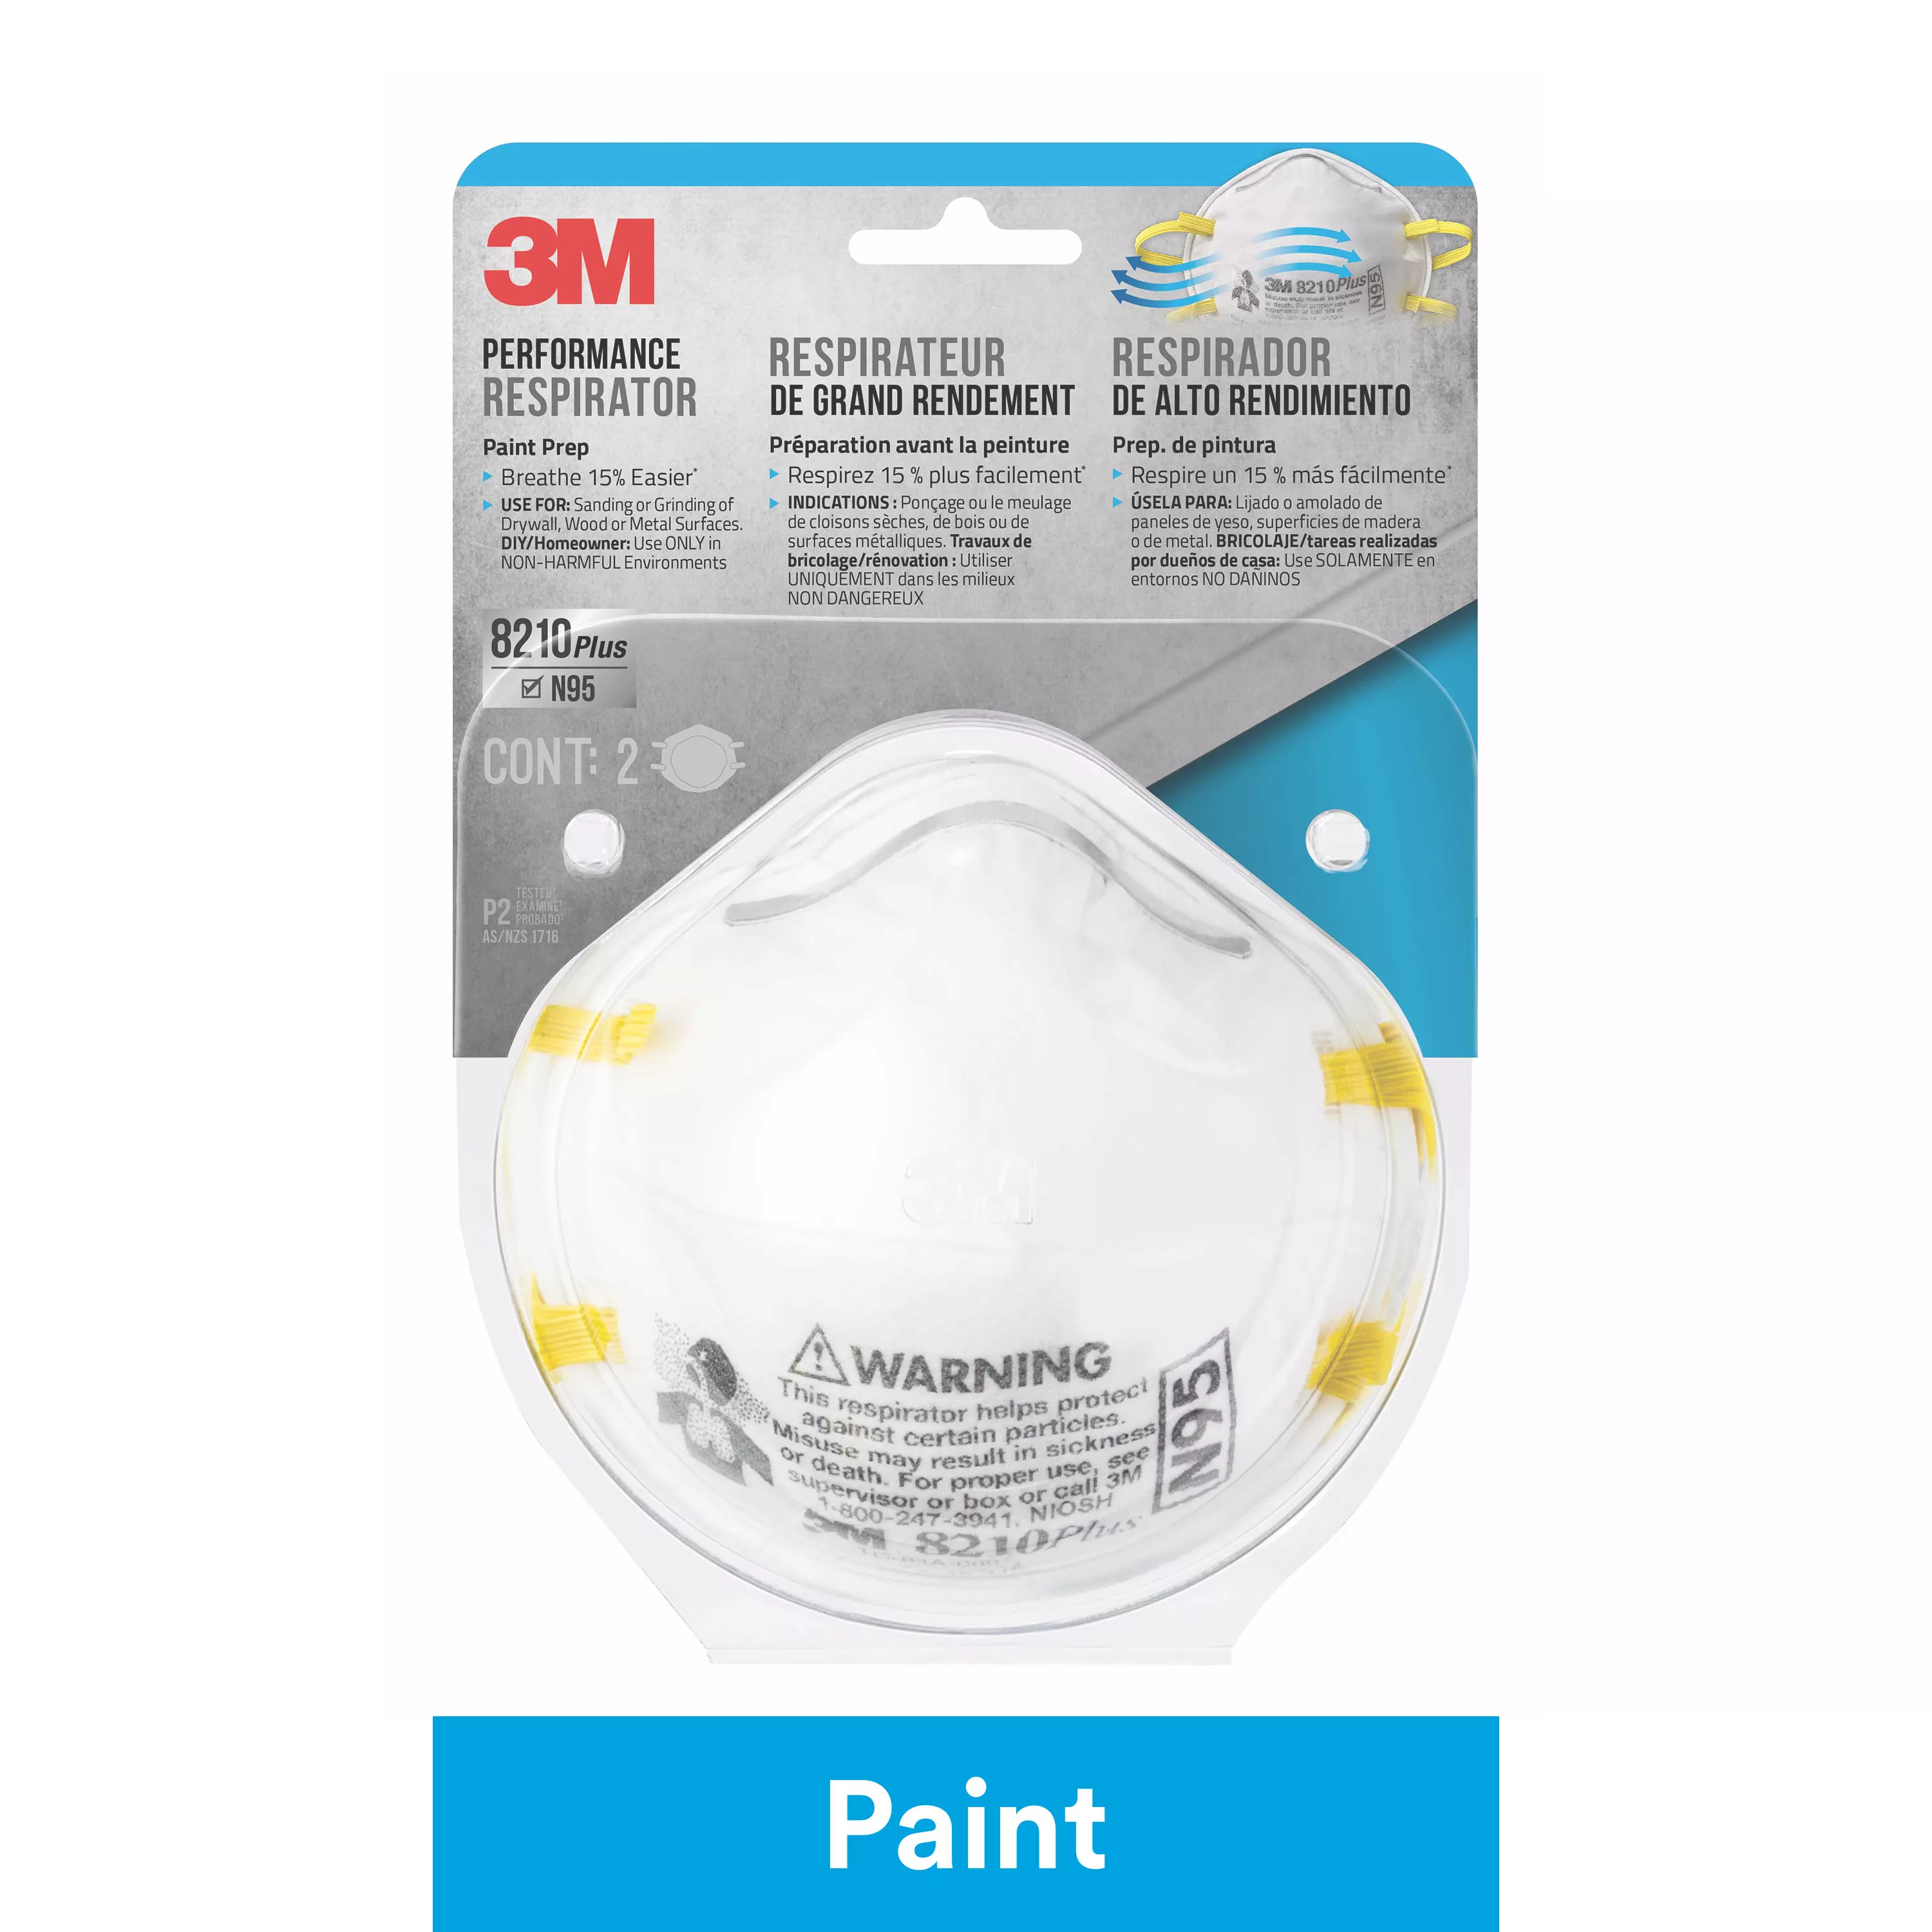 3M™ Performance Paint Prep Respirator N95 Particulate, 8210PP2-DC, 2
eaches/pack, 12 packs/case